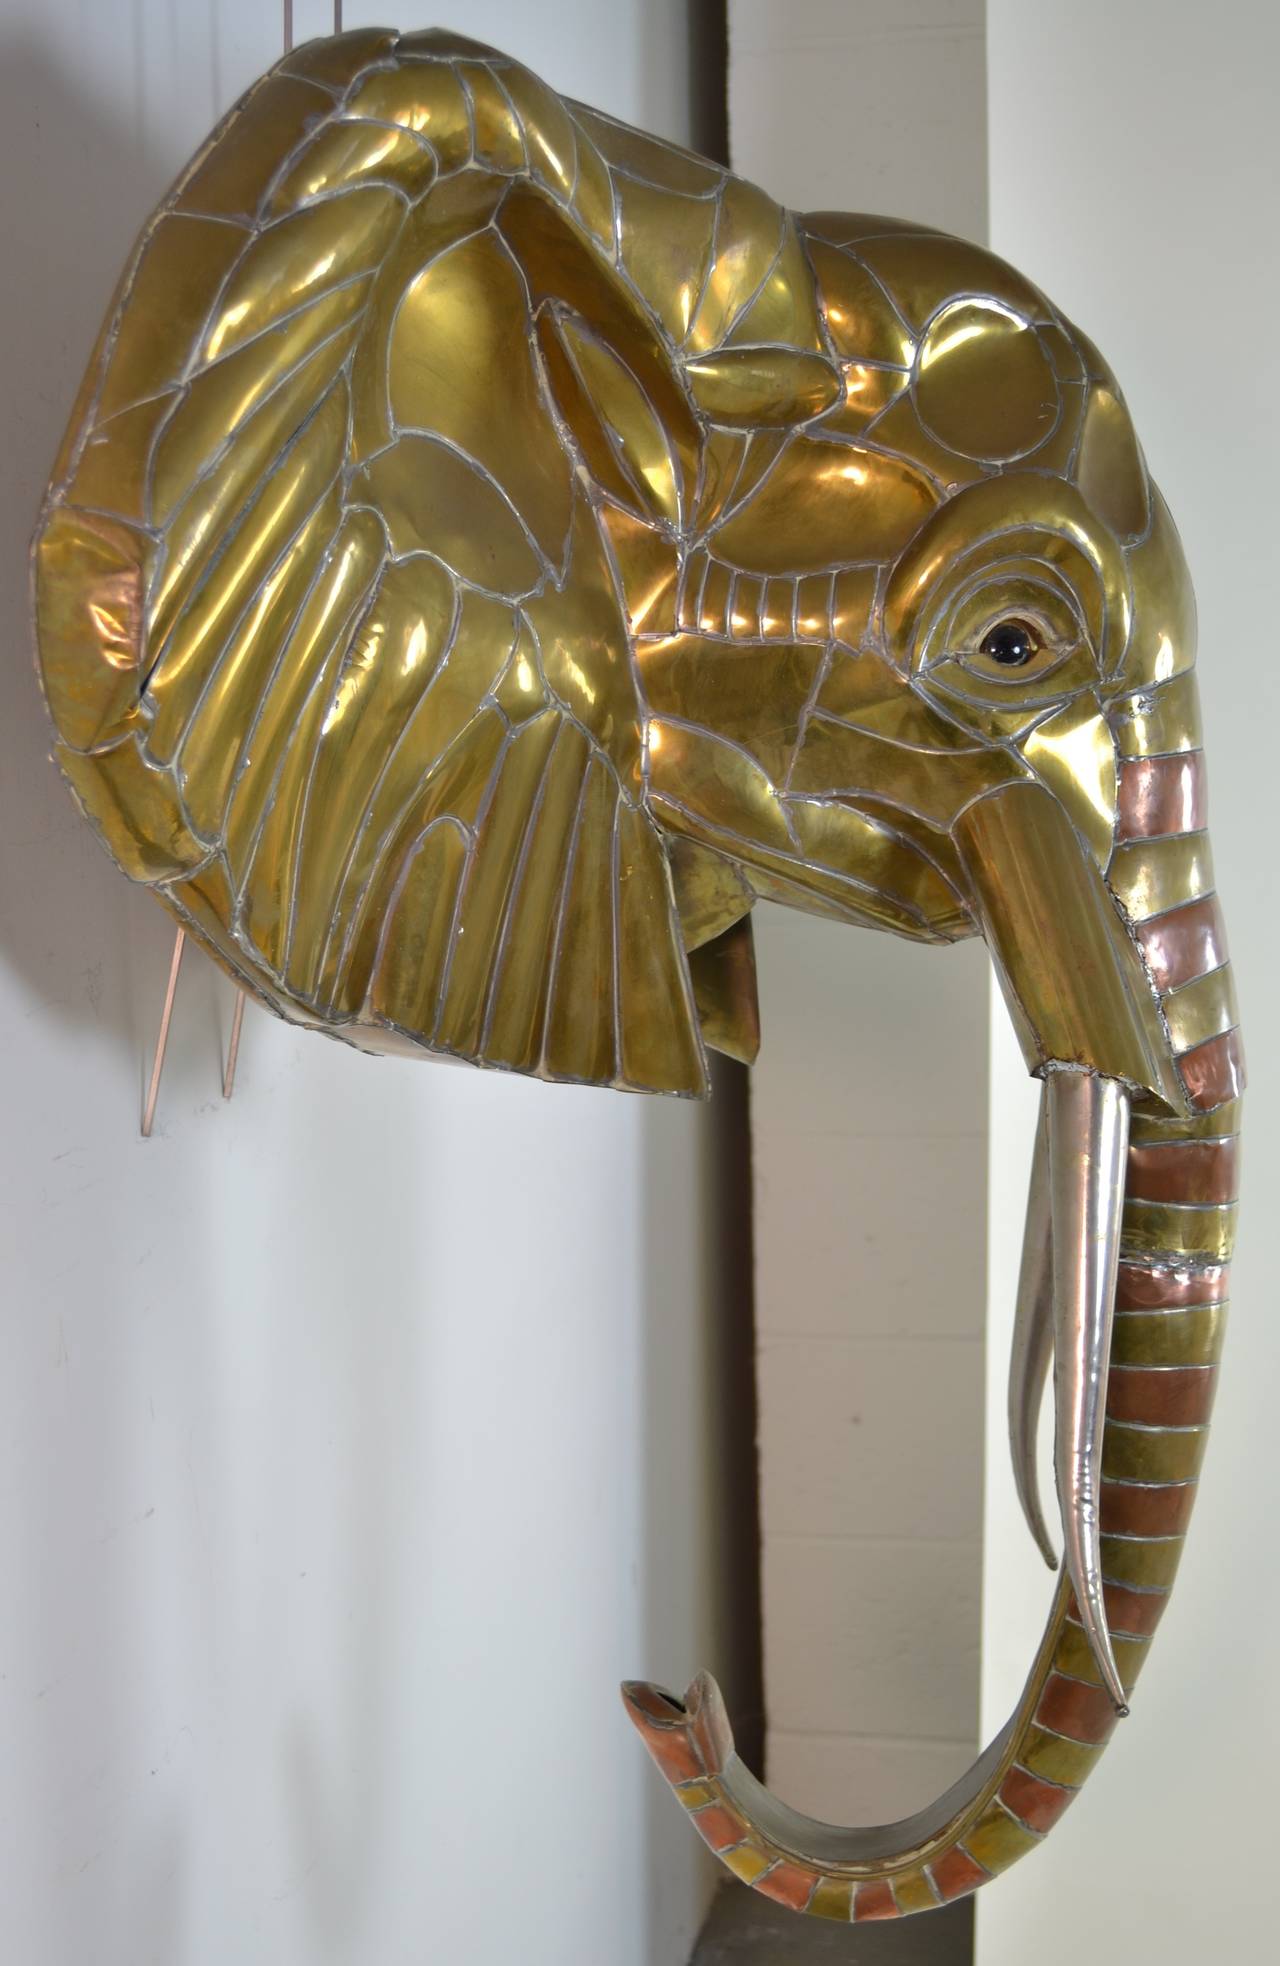 Charming elephant sculpture in brass, copper and tin with glass eyes. Wonderful size and presence. Minor damage to back side of of one ear.